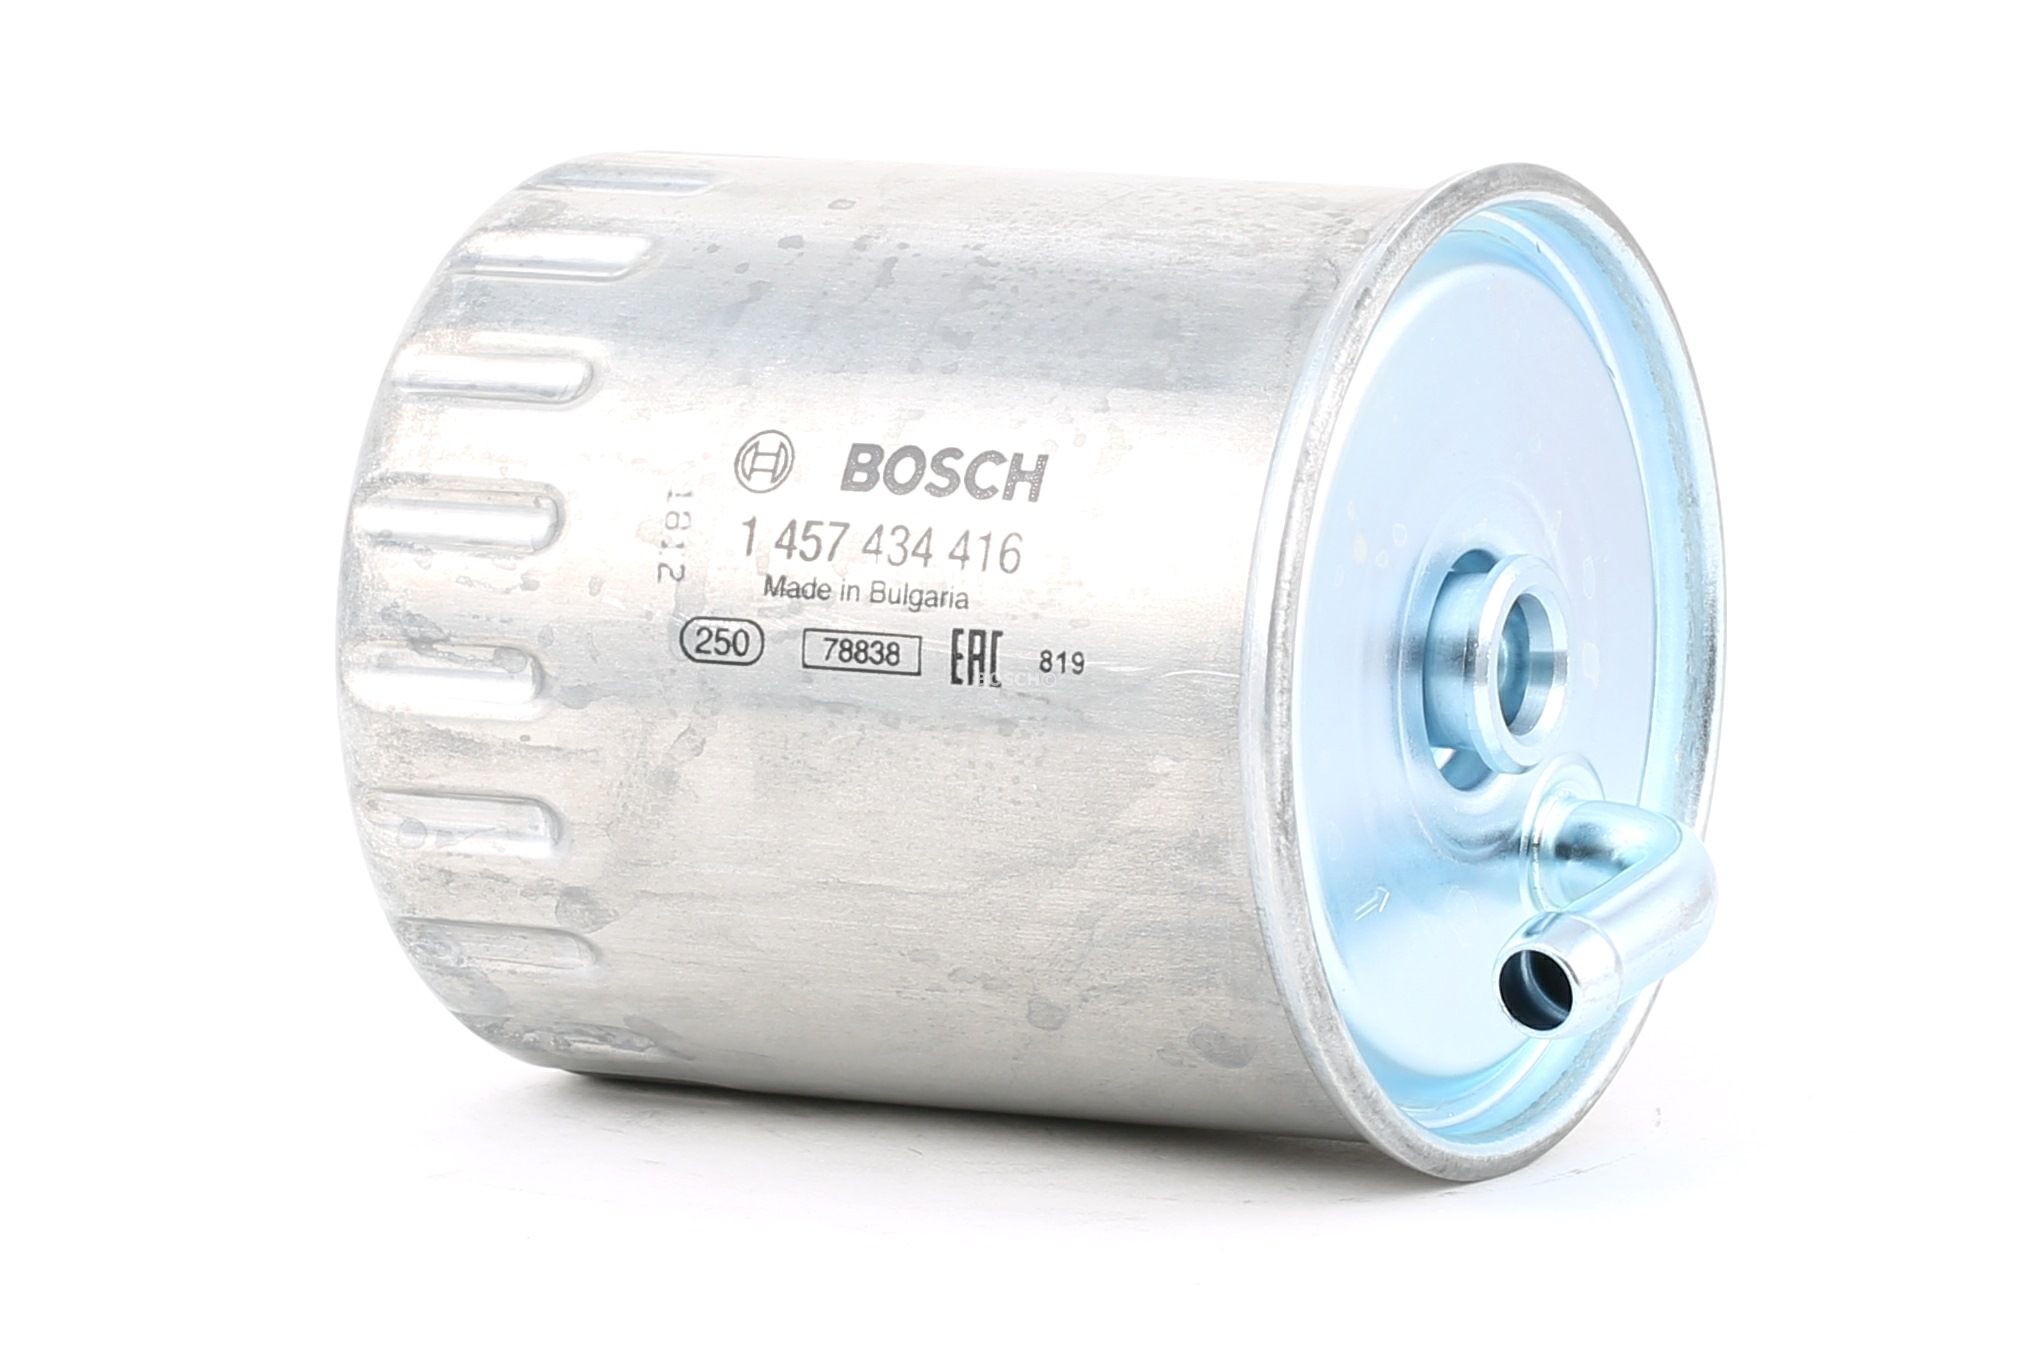 N 4416 BOSCH 1 457 434 416 Mercedes CL203 2008 Filtro combustibile